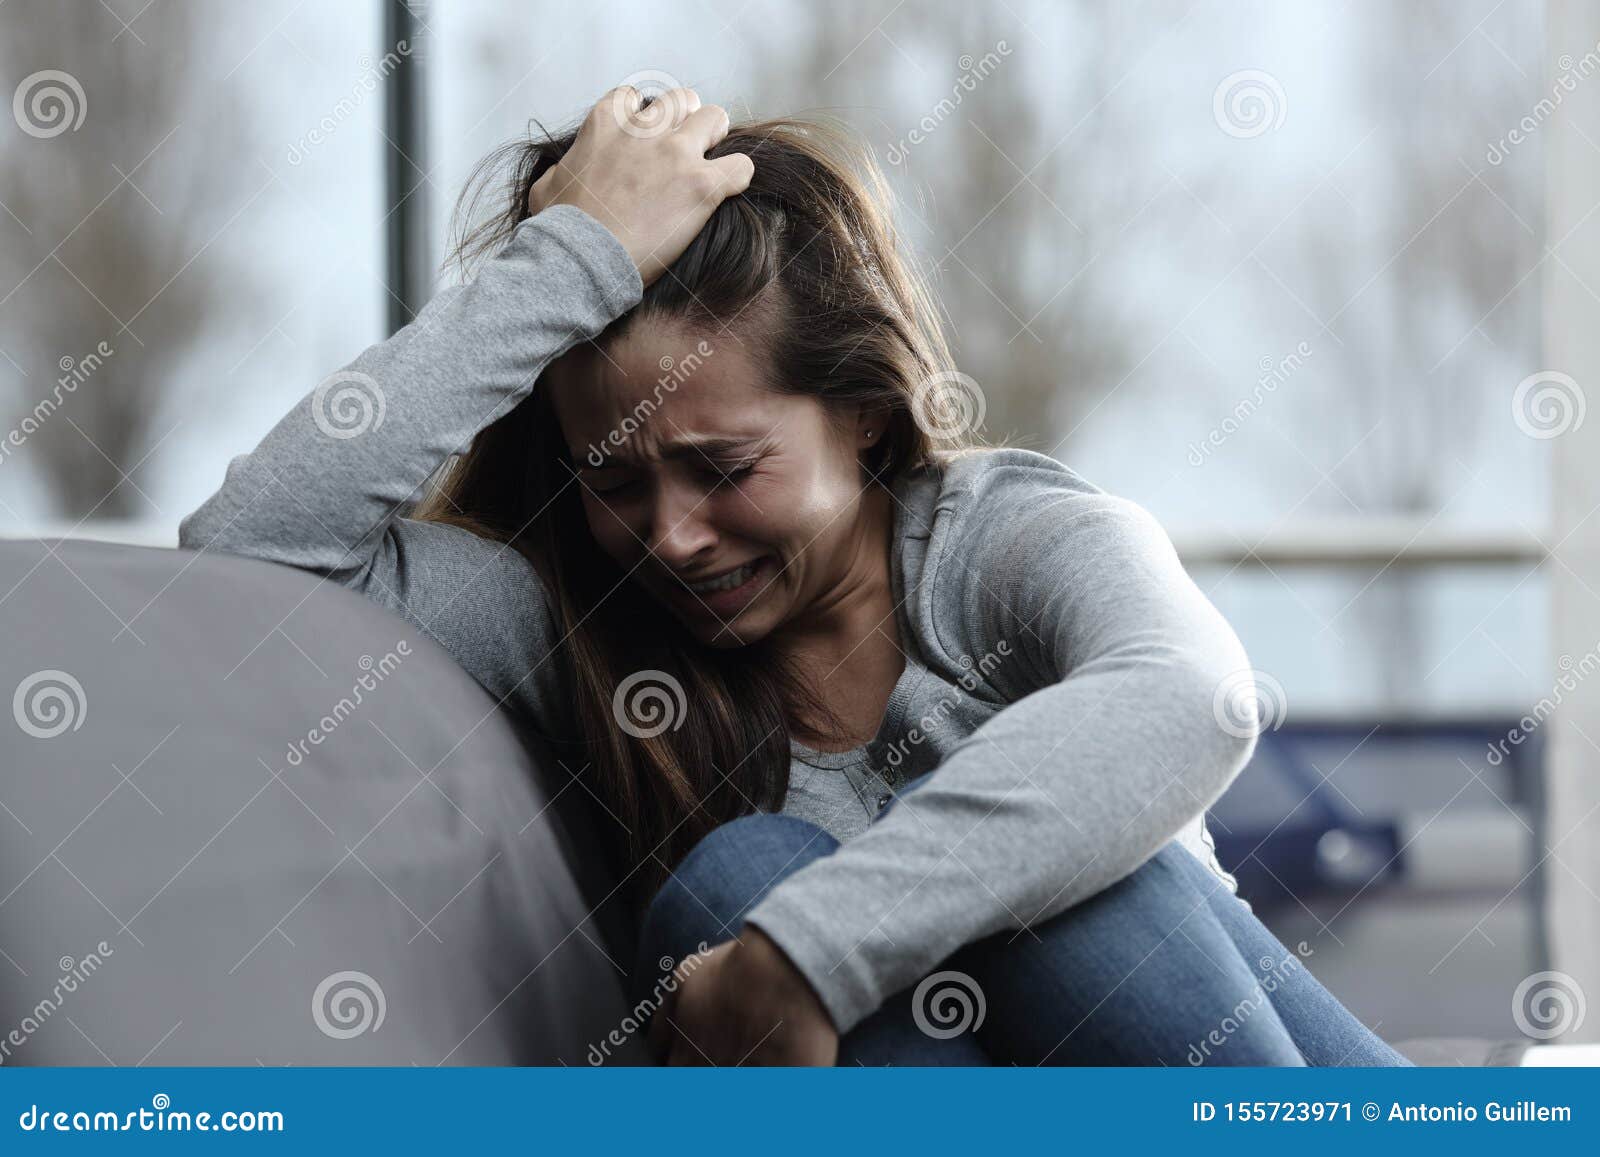 Sad Girl Complaining and Crying at Home Stock Image - Image of ...